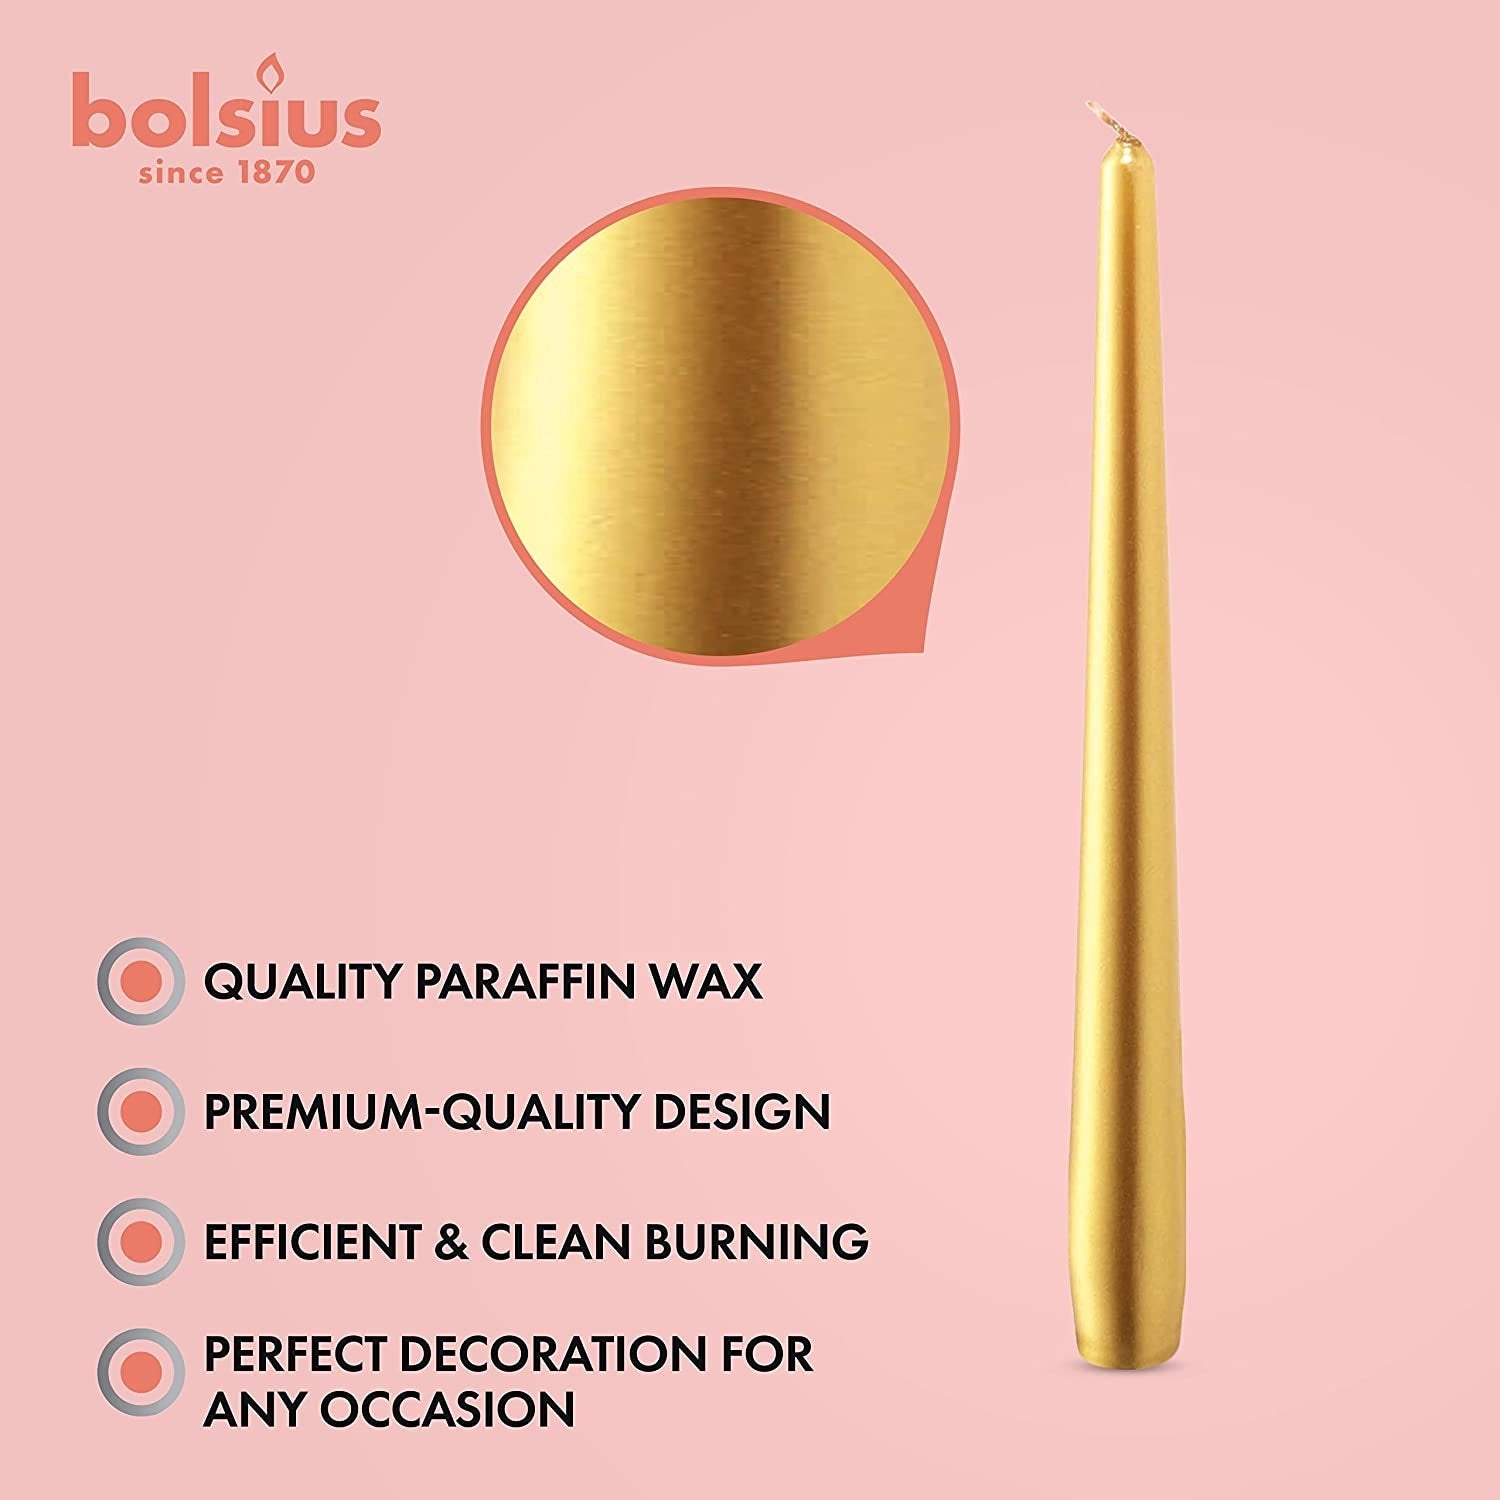 BOLSIUS Metallic Gold Taper Candles - 12 Pack Individually Wrapped 10 Inch Dinner Candle Set - 8 Burn Hours - Premium European Quality - Unscented Smokeless & Dripless Household Party Candlesticks